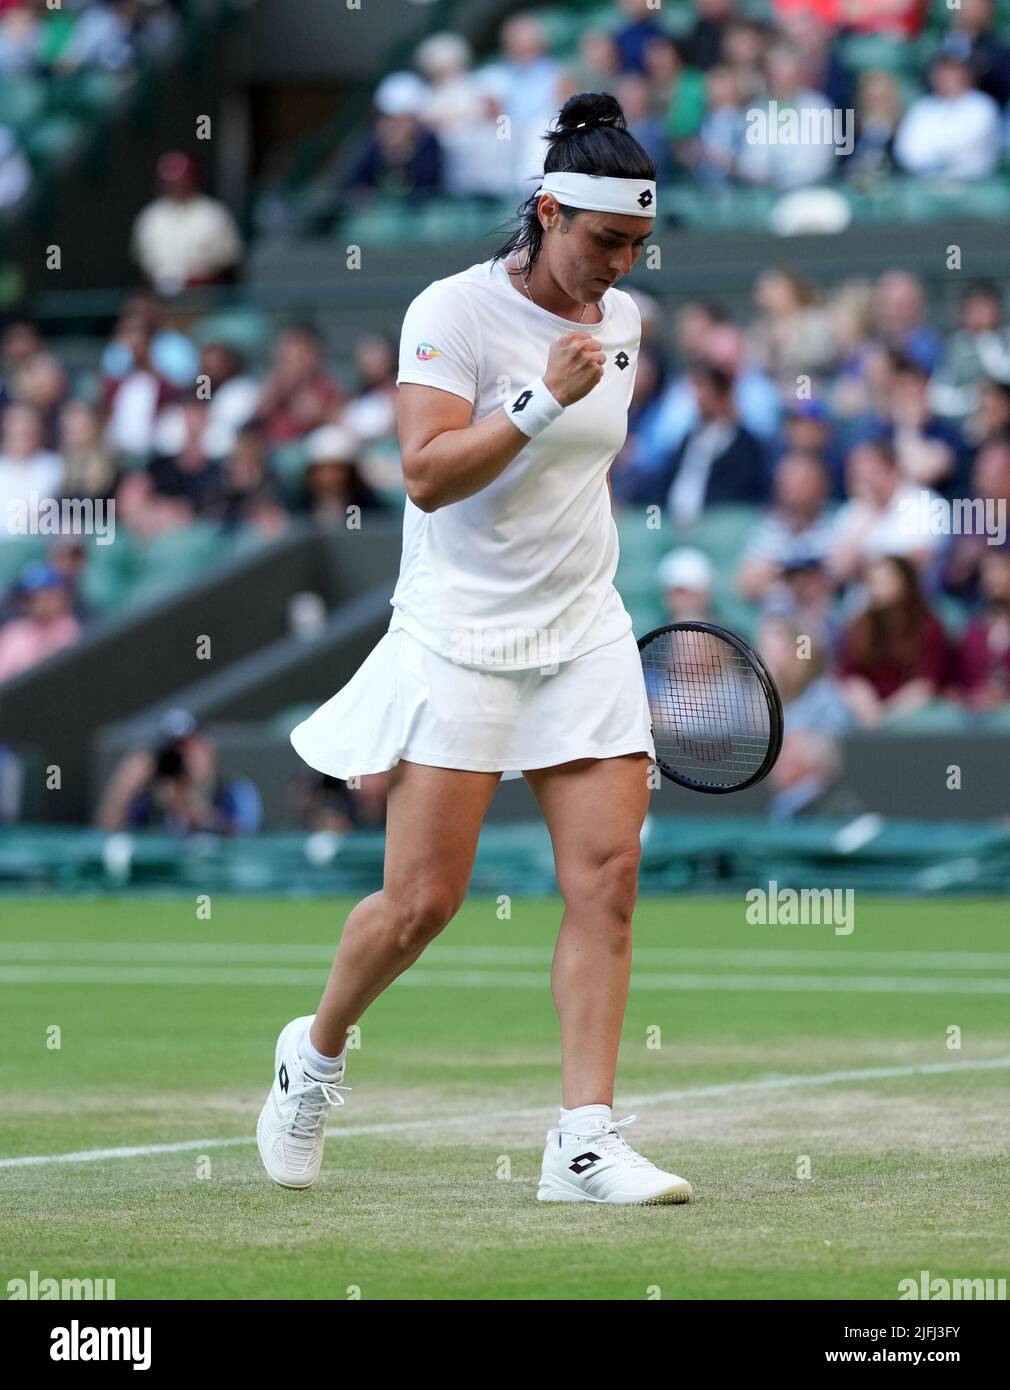 Ons Jabeur after winning her Ladies Singles fourth round match against Elise Mertens on court 1 during day seven of the 2022 Wimbledon Championships at the All England Lawn Tennis and Croquet